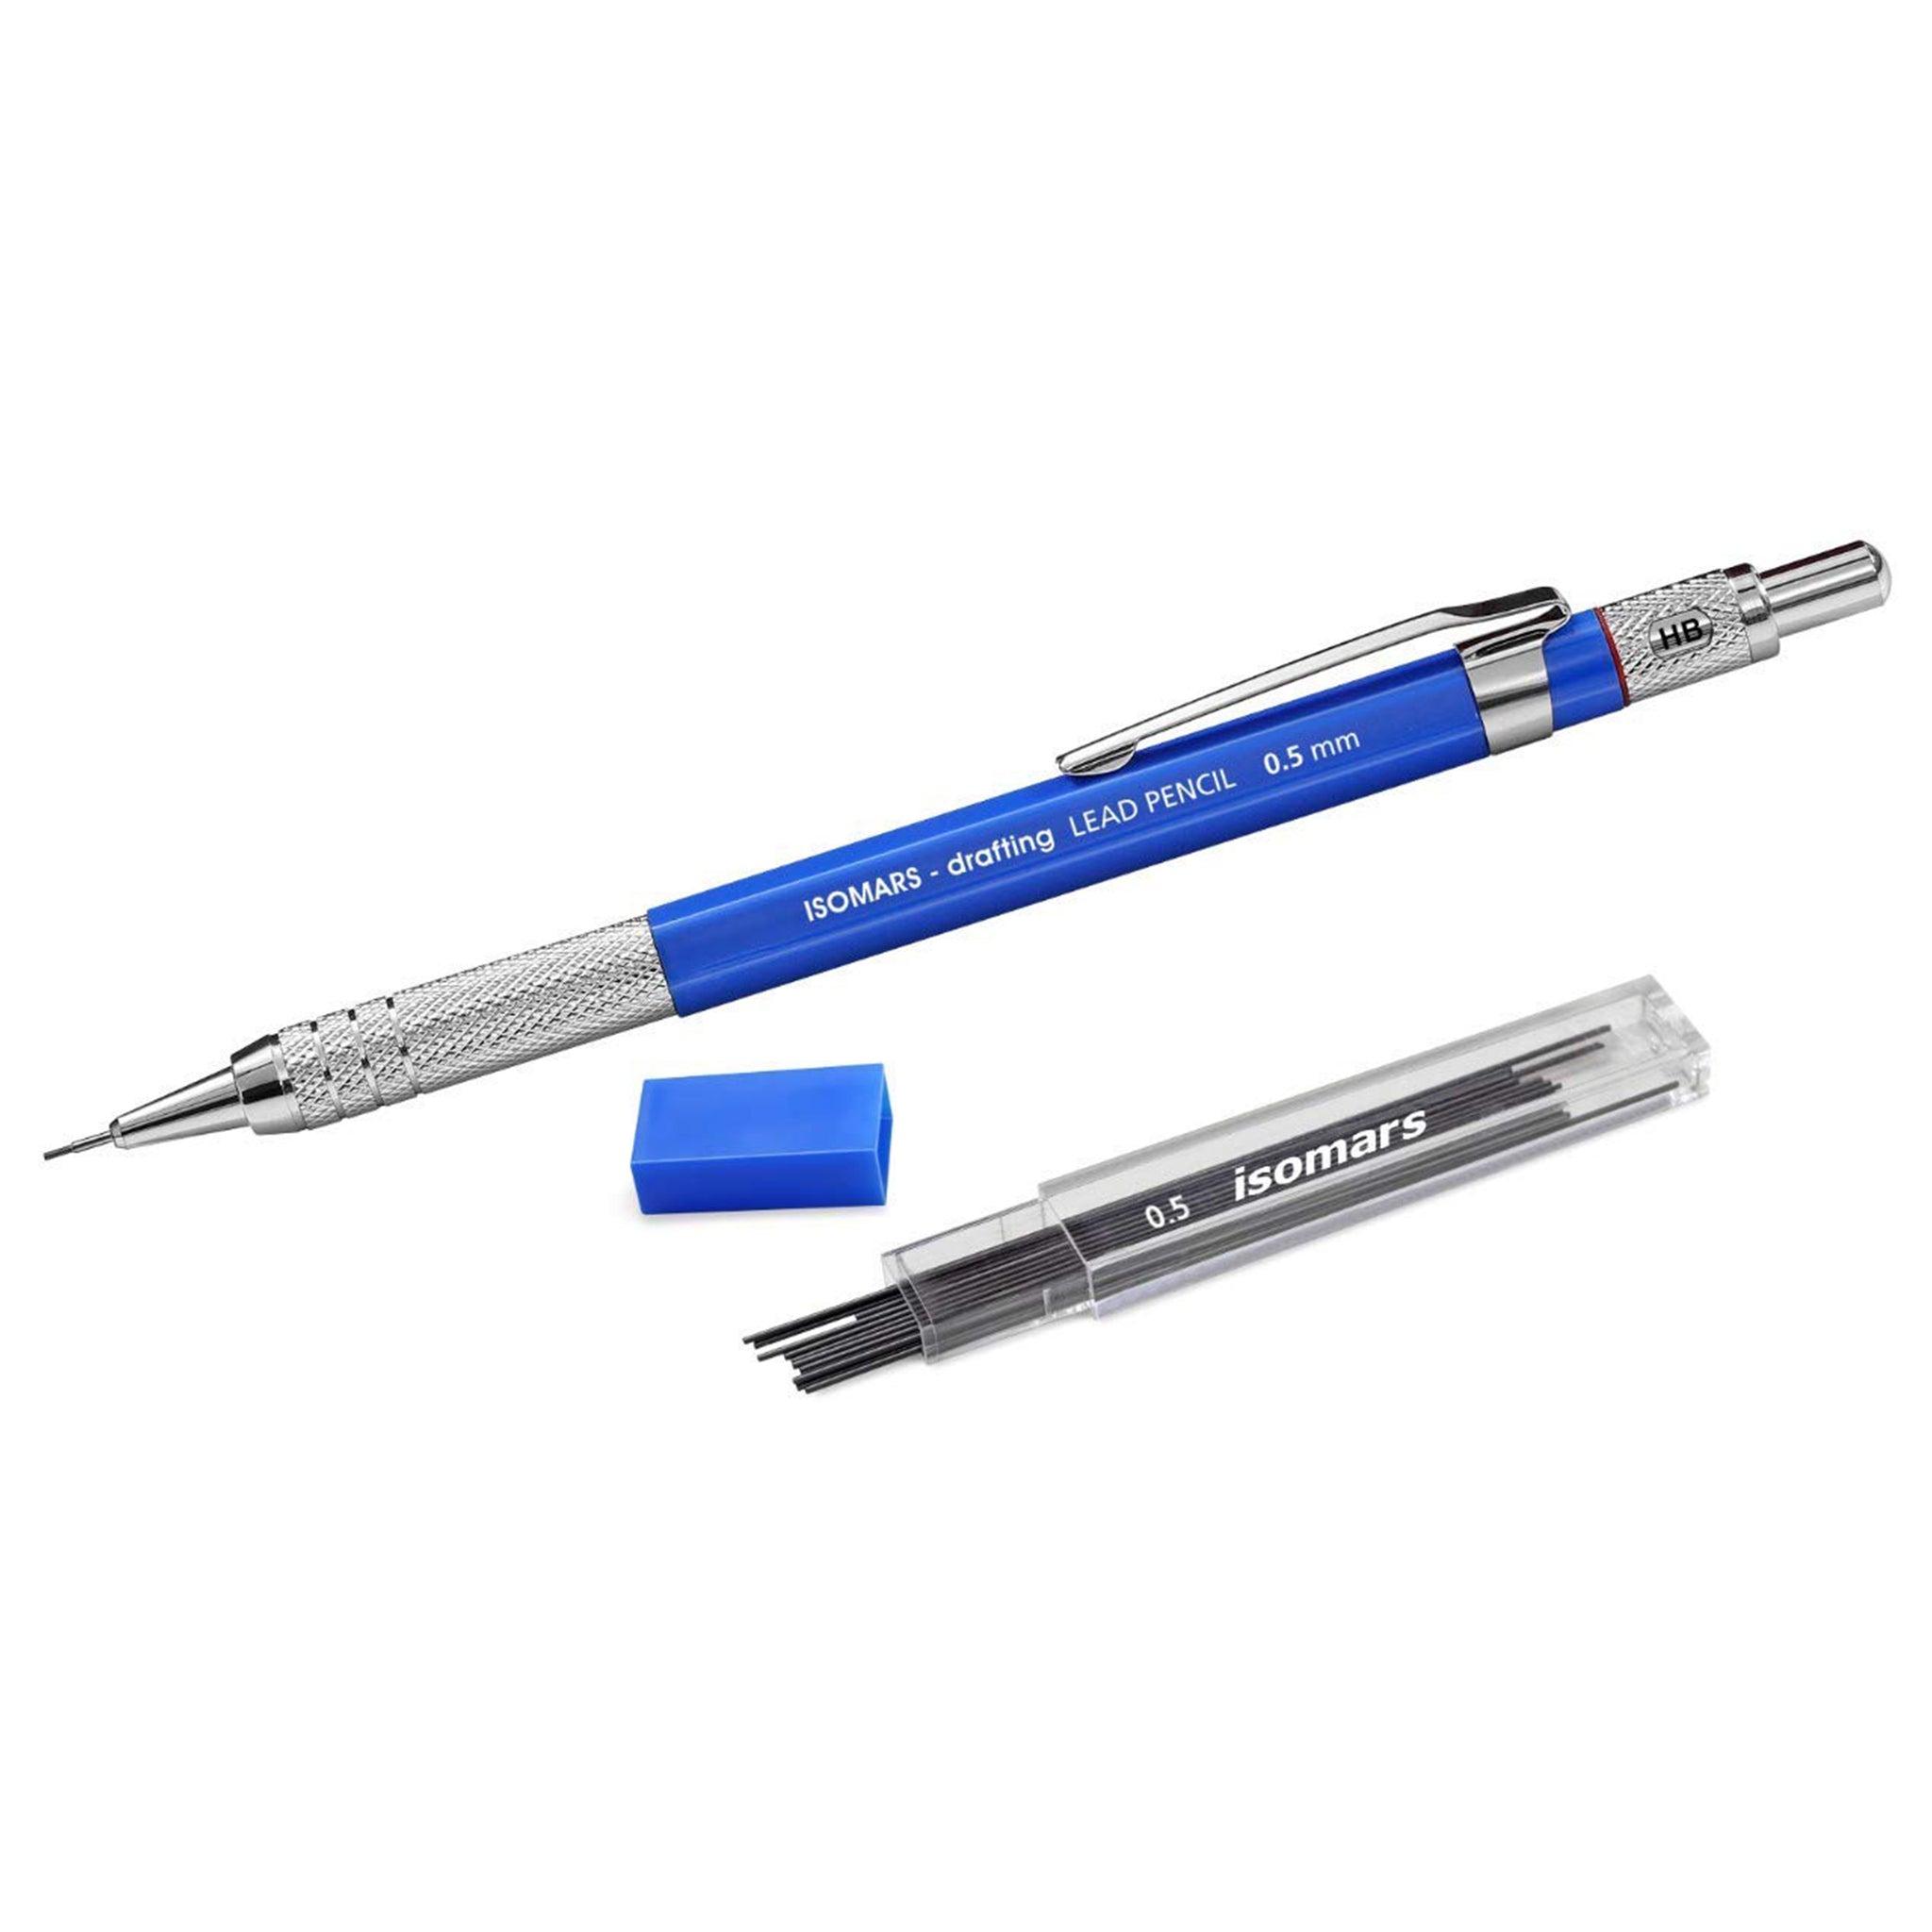 Isomars Mechanical Pencil 0.5mm And 2mm Combo - Clutch Pencils - Black